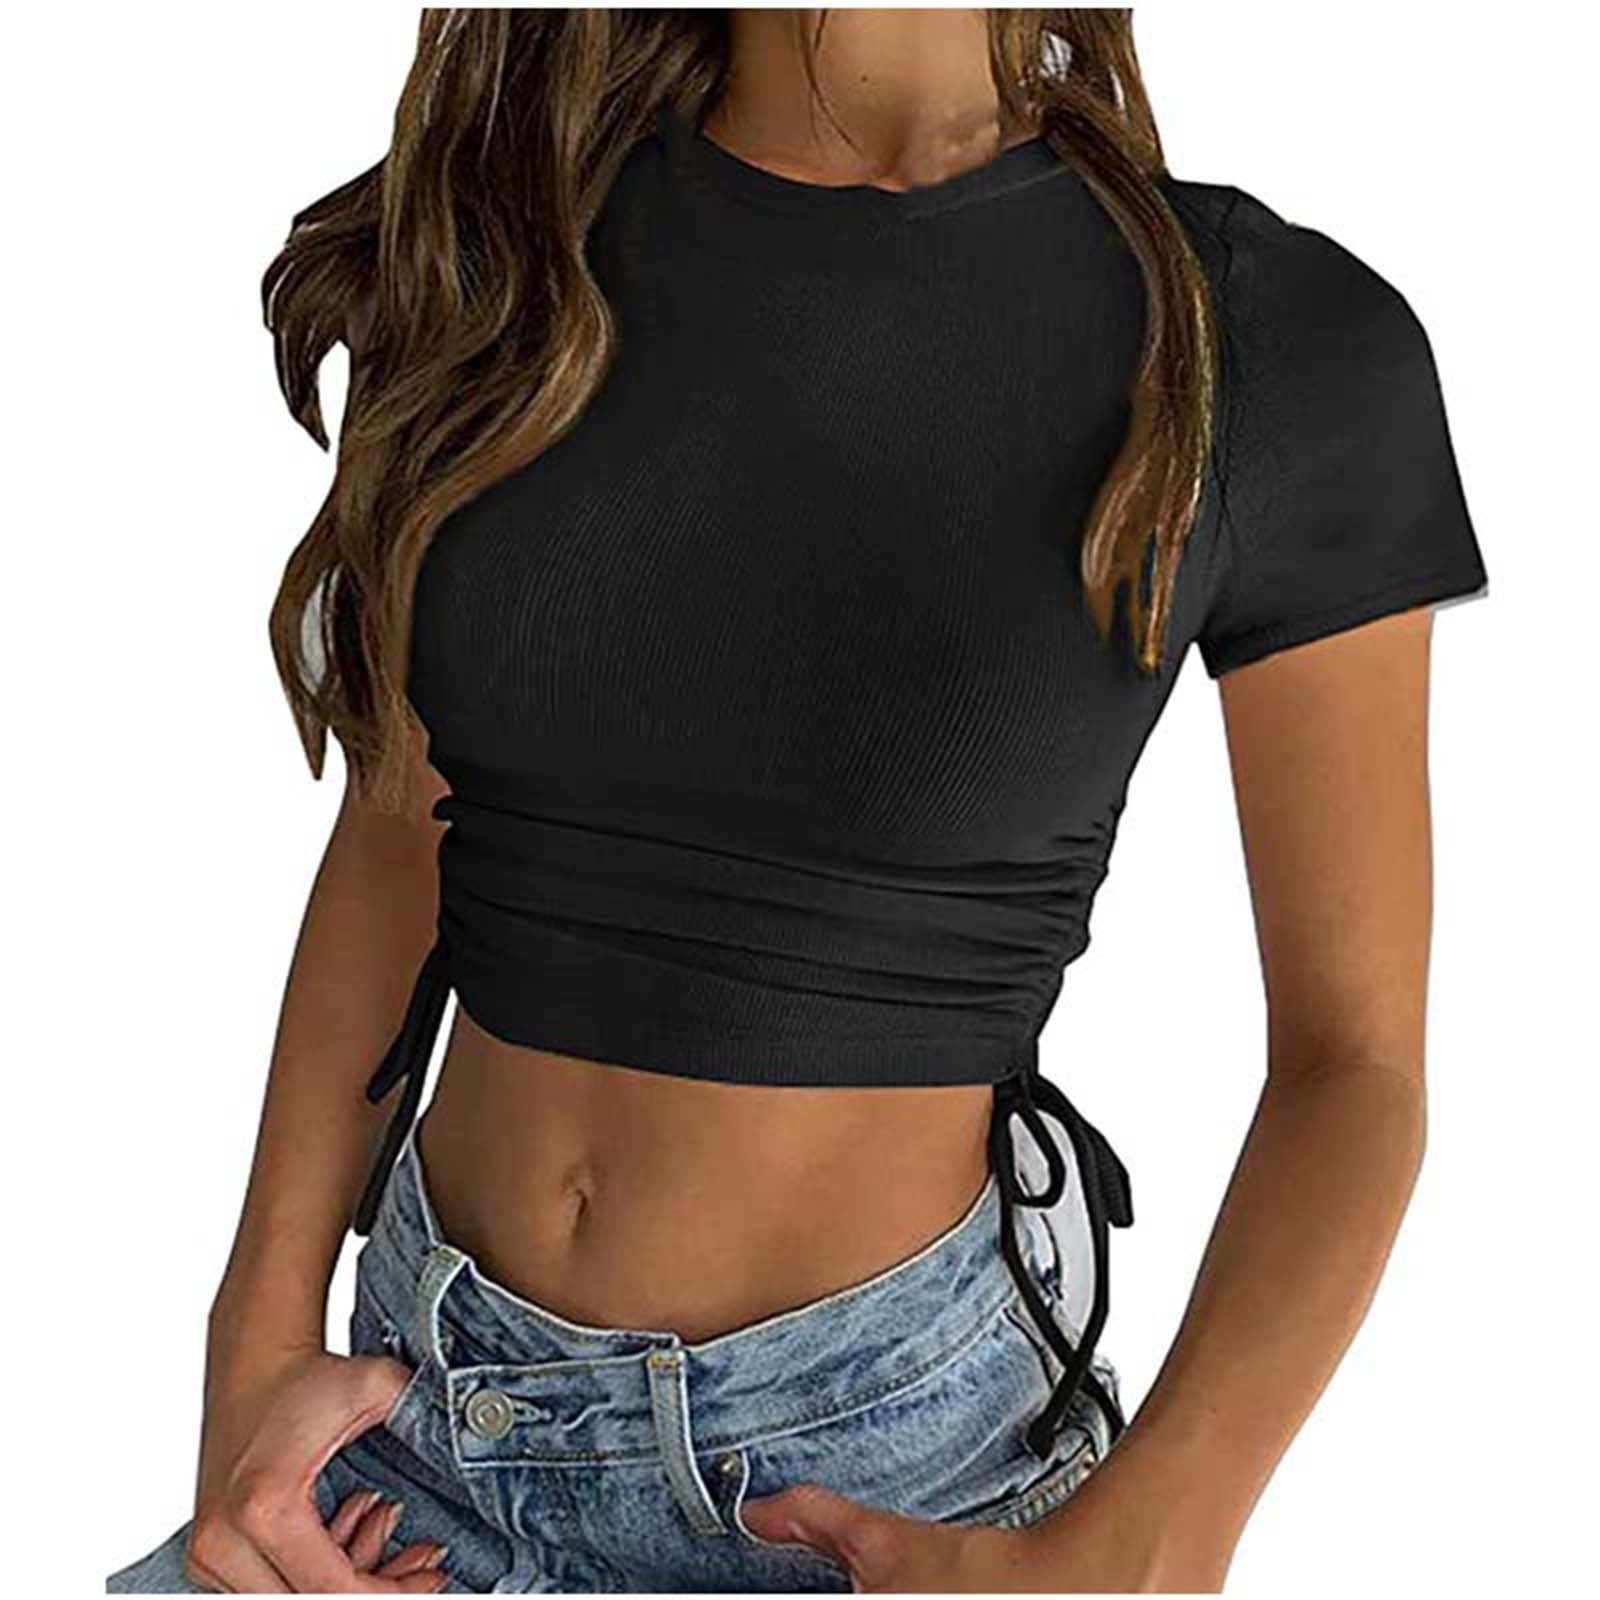 Crew Neck Crop Top - Ready-to-Wear 1AB8BO